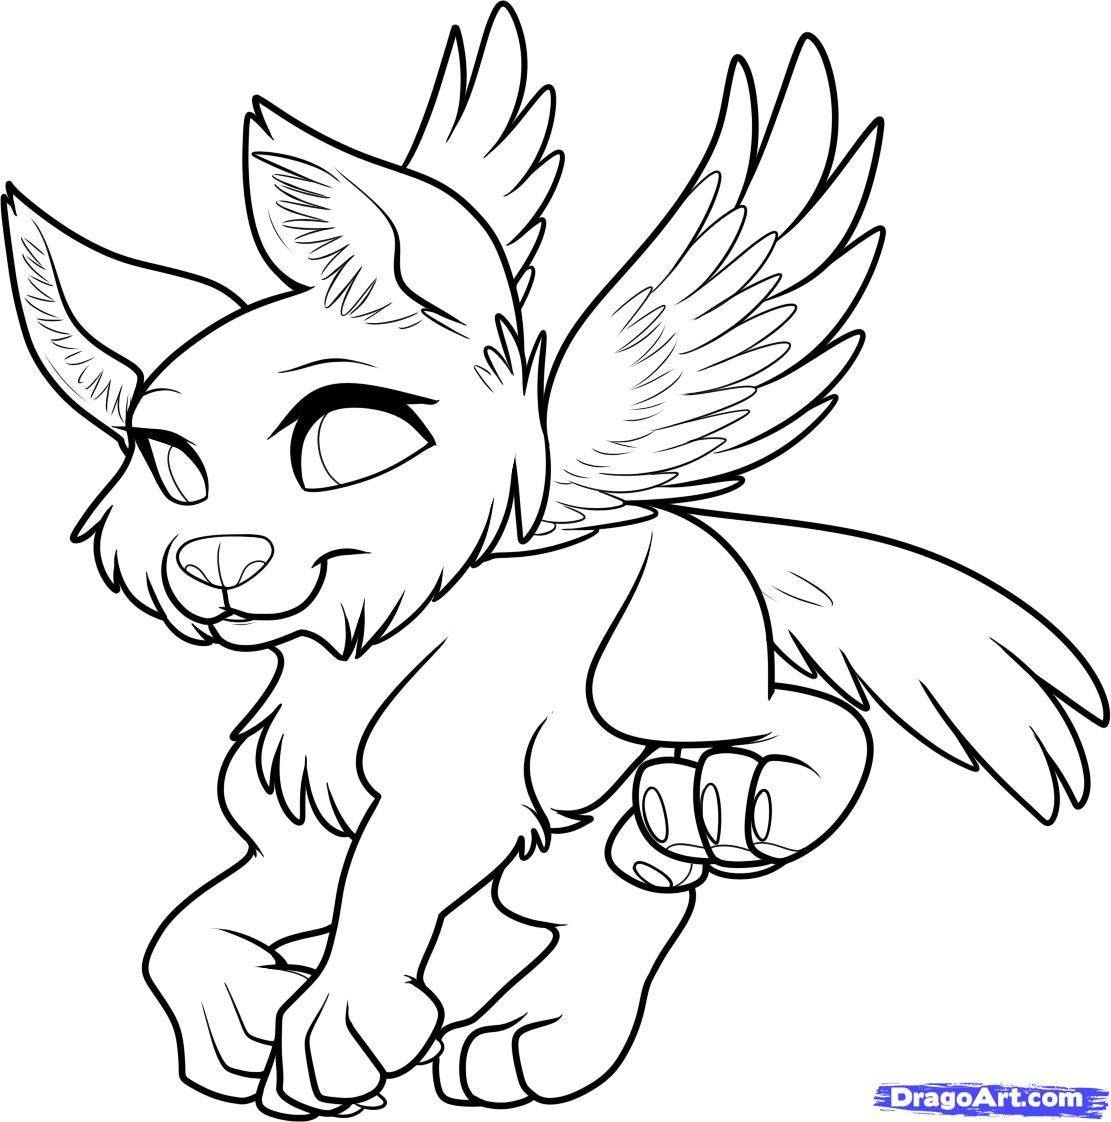 Wolf Cub Coloring Pages at GetColorings.com | Free ...